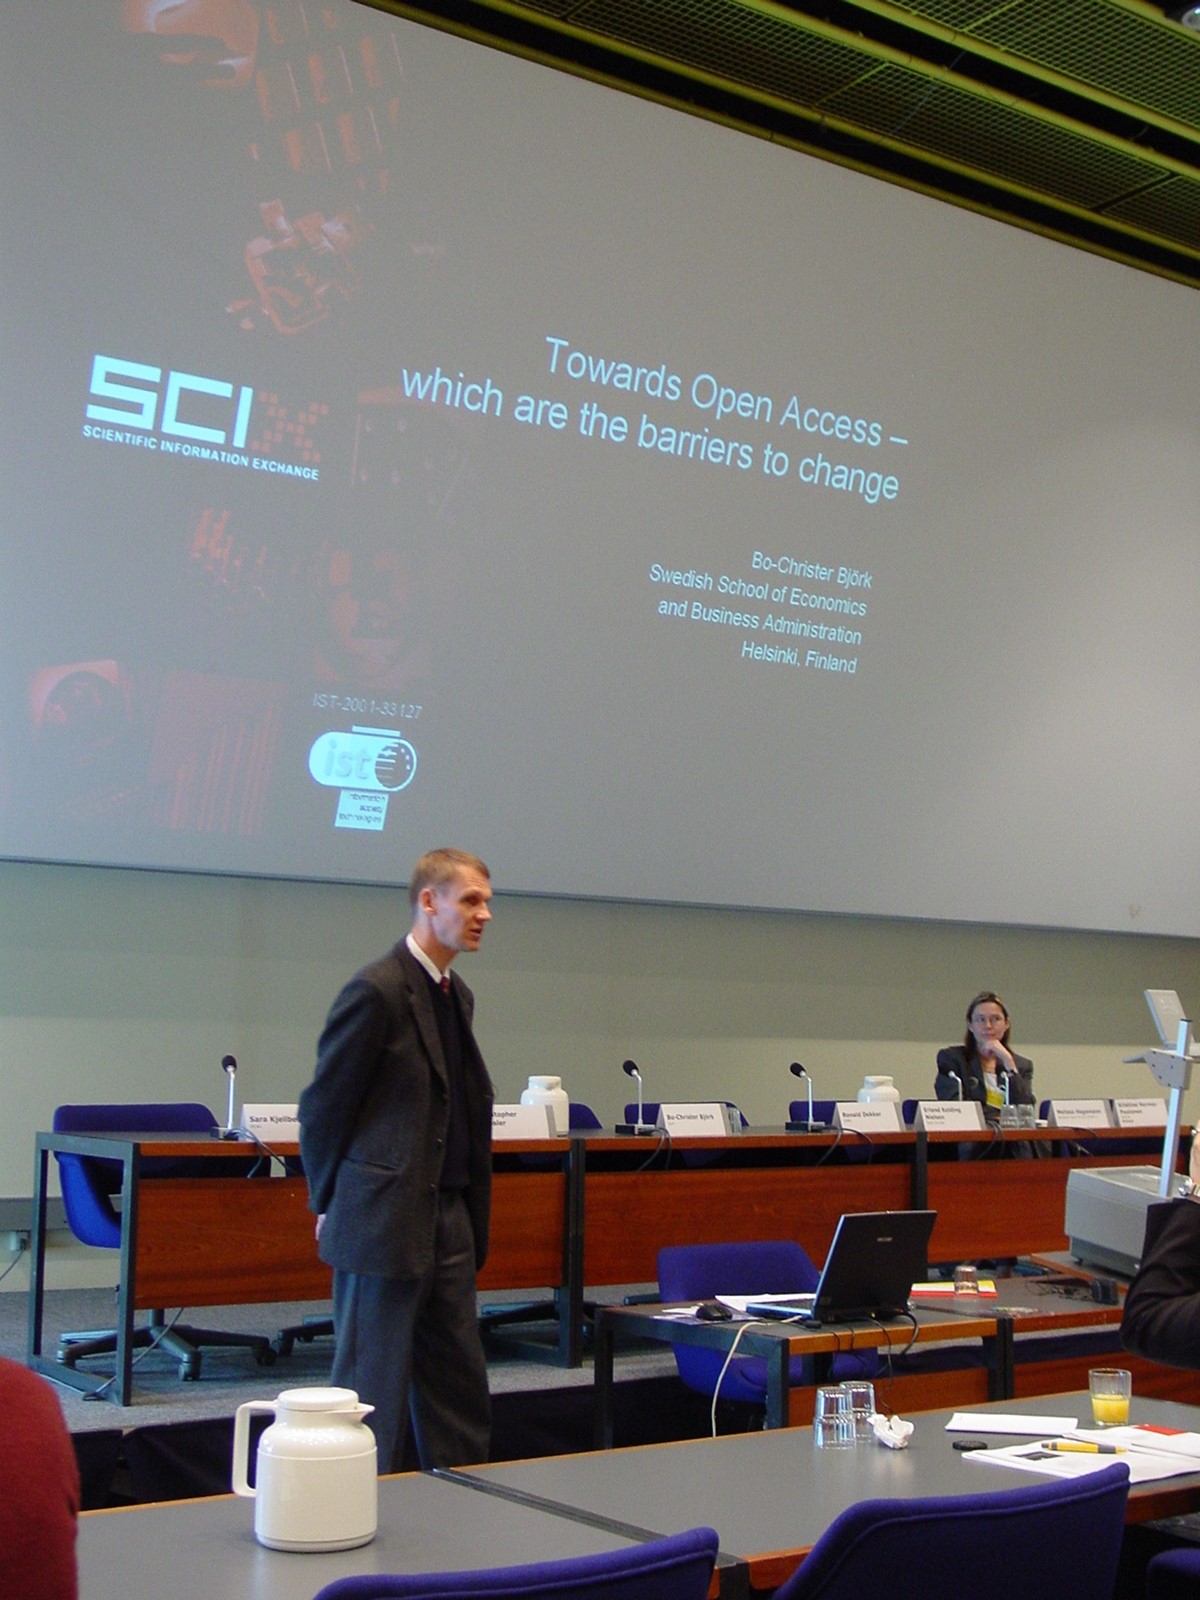 Bo-Christer Björk giving a lecture. Kristiina Hormia-Poutanen, chair of the session, sits behind the table.